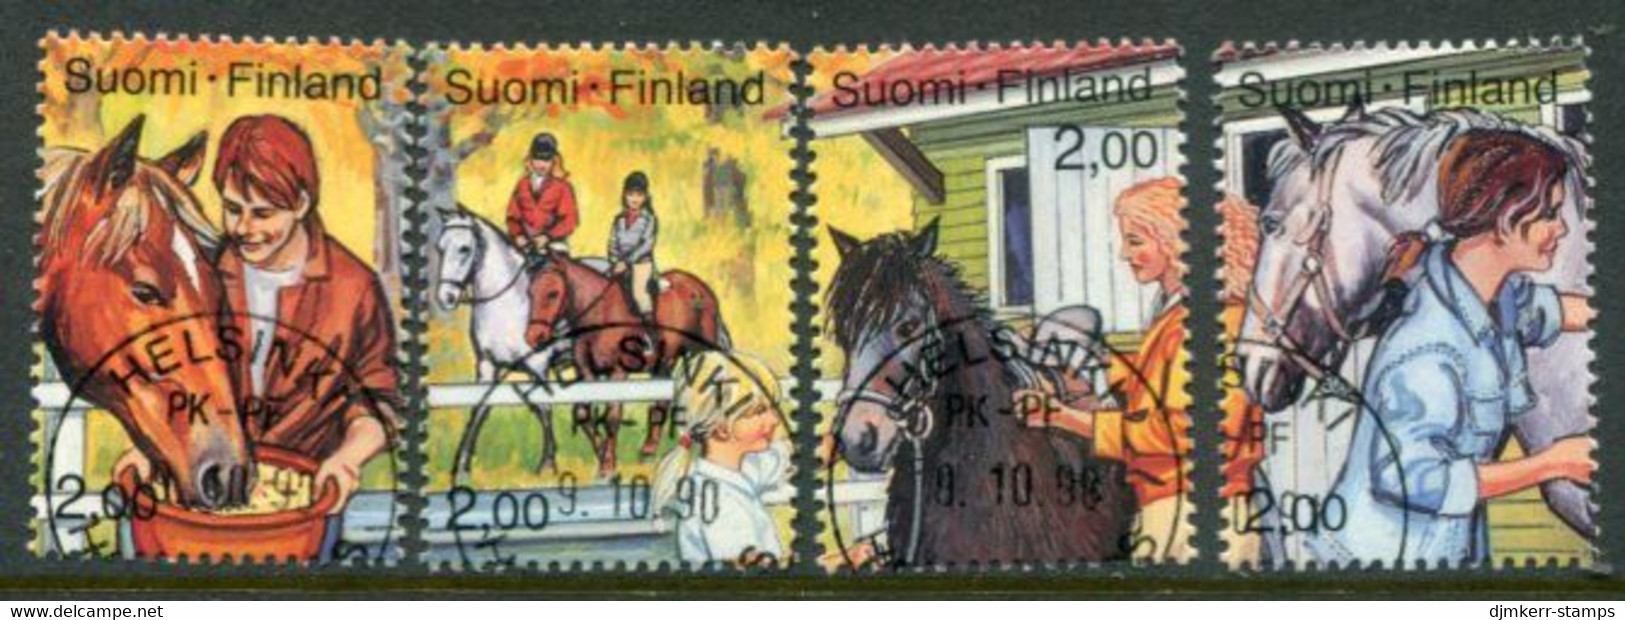 FINLAND 1990 Horse-riding Singles Ex Block Used.  Michel 1120-23 - Used Stamps